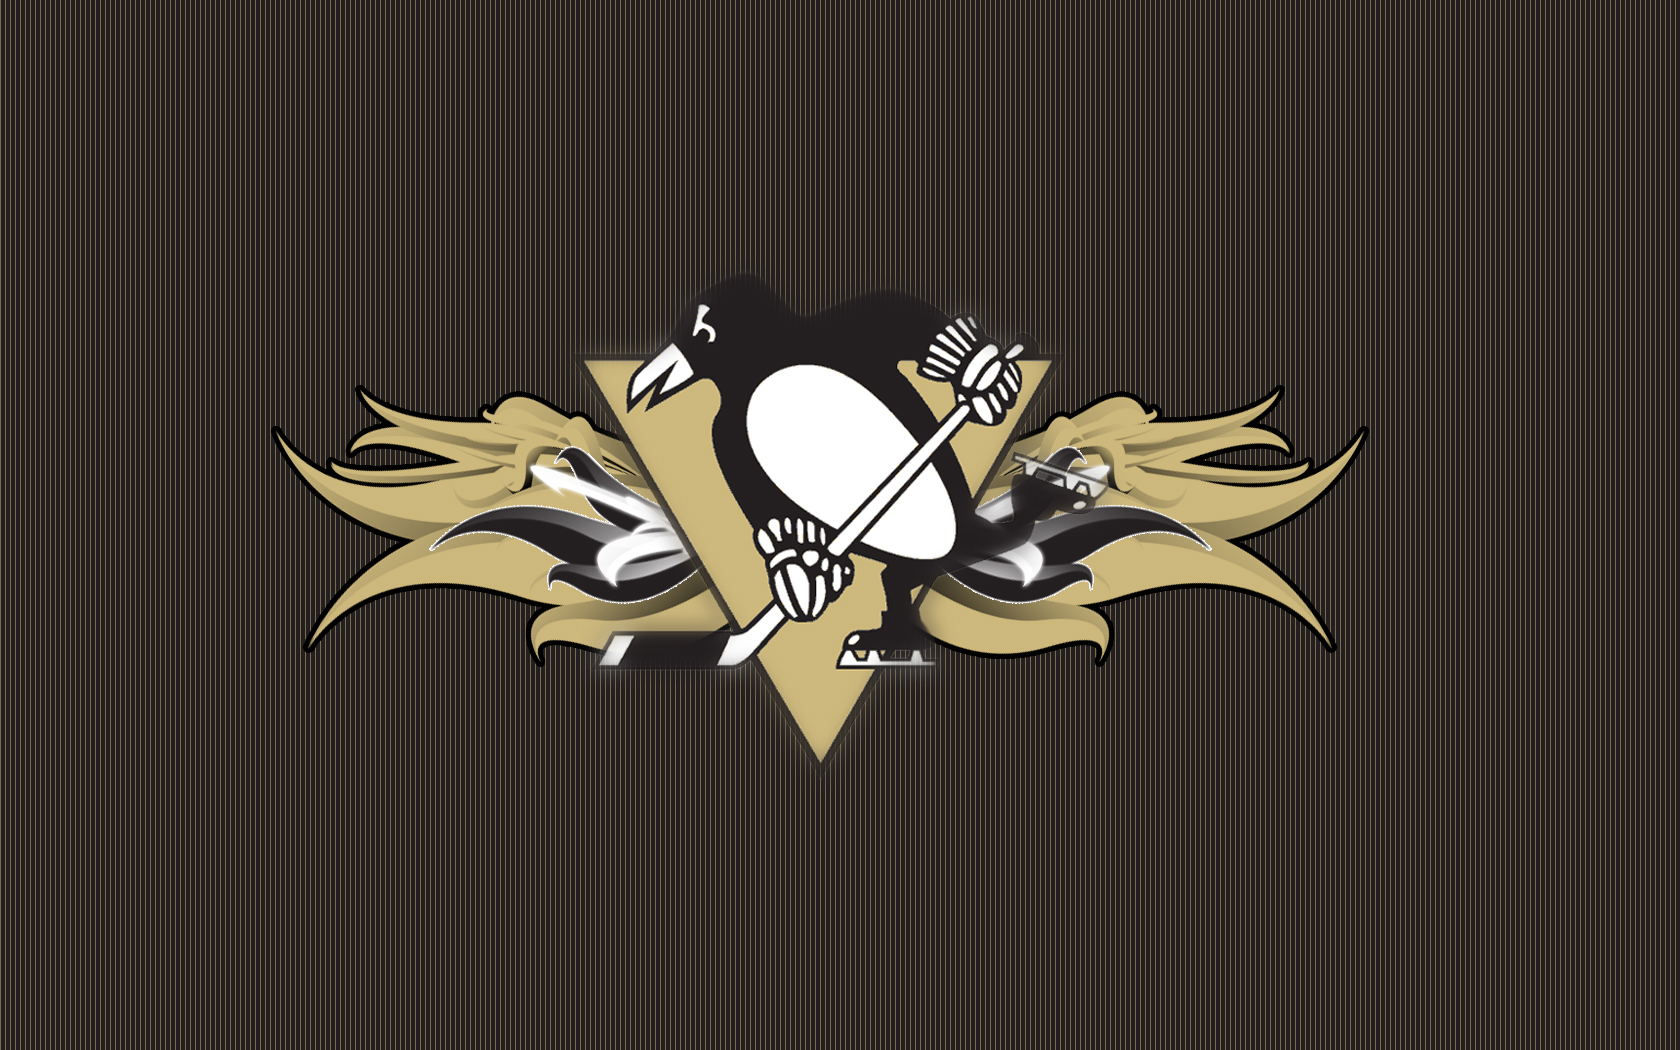 Pittsburgh Penguins by FinkyDink